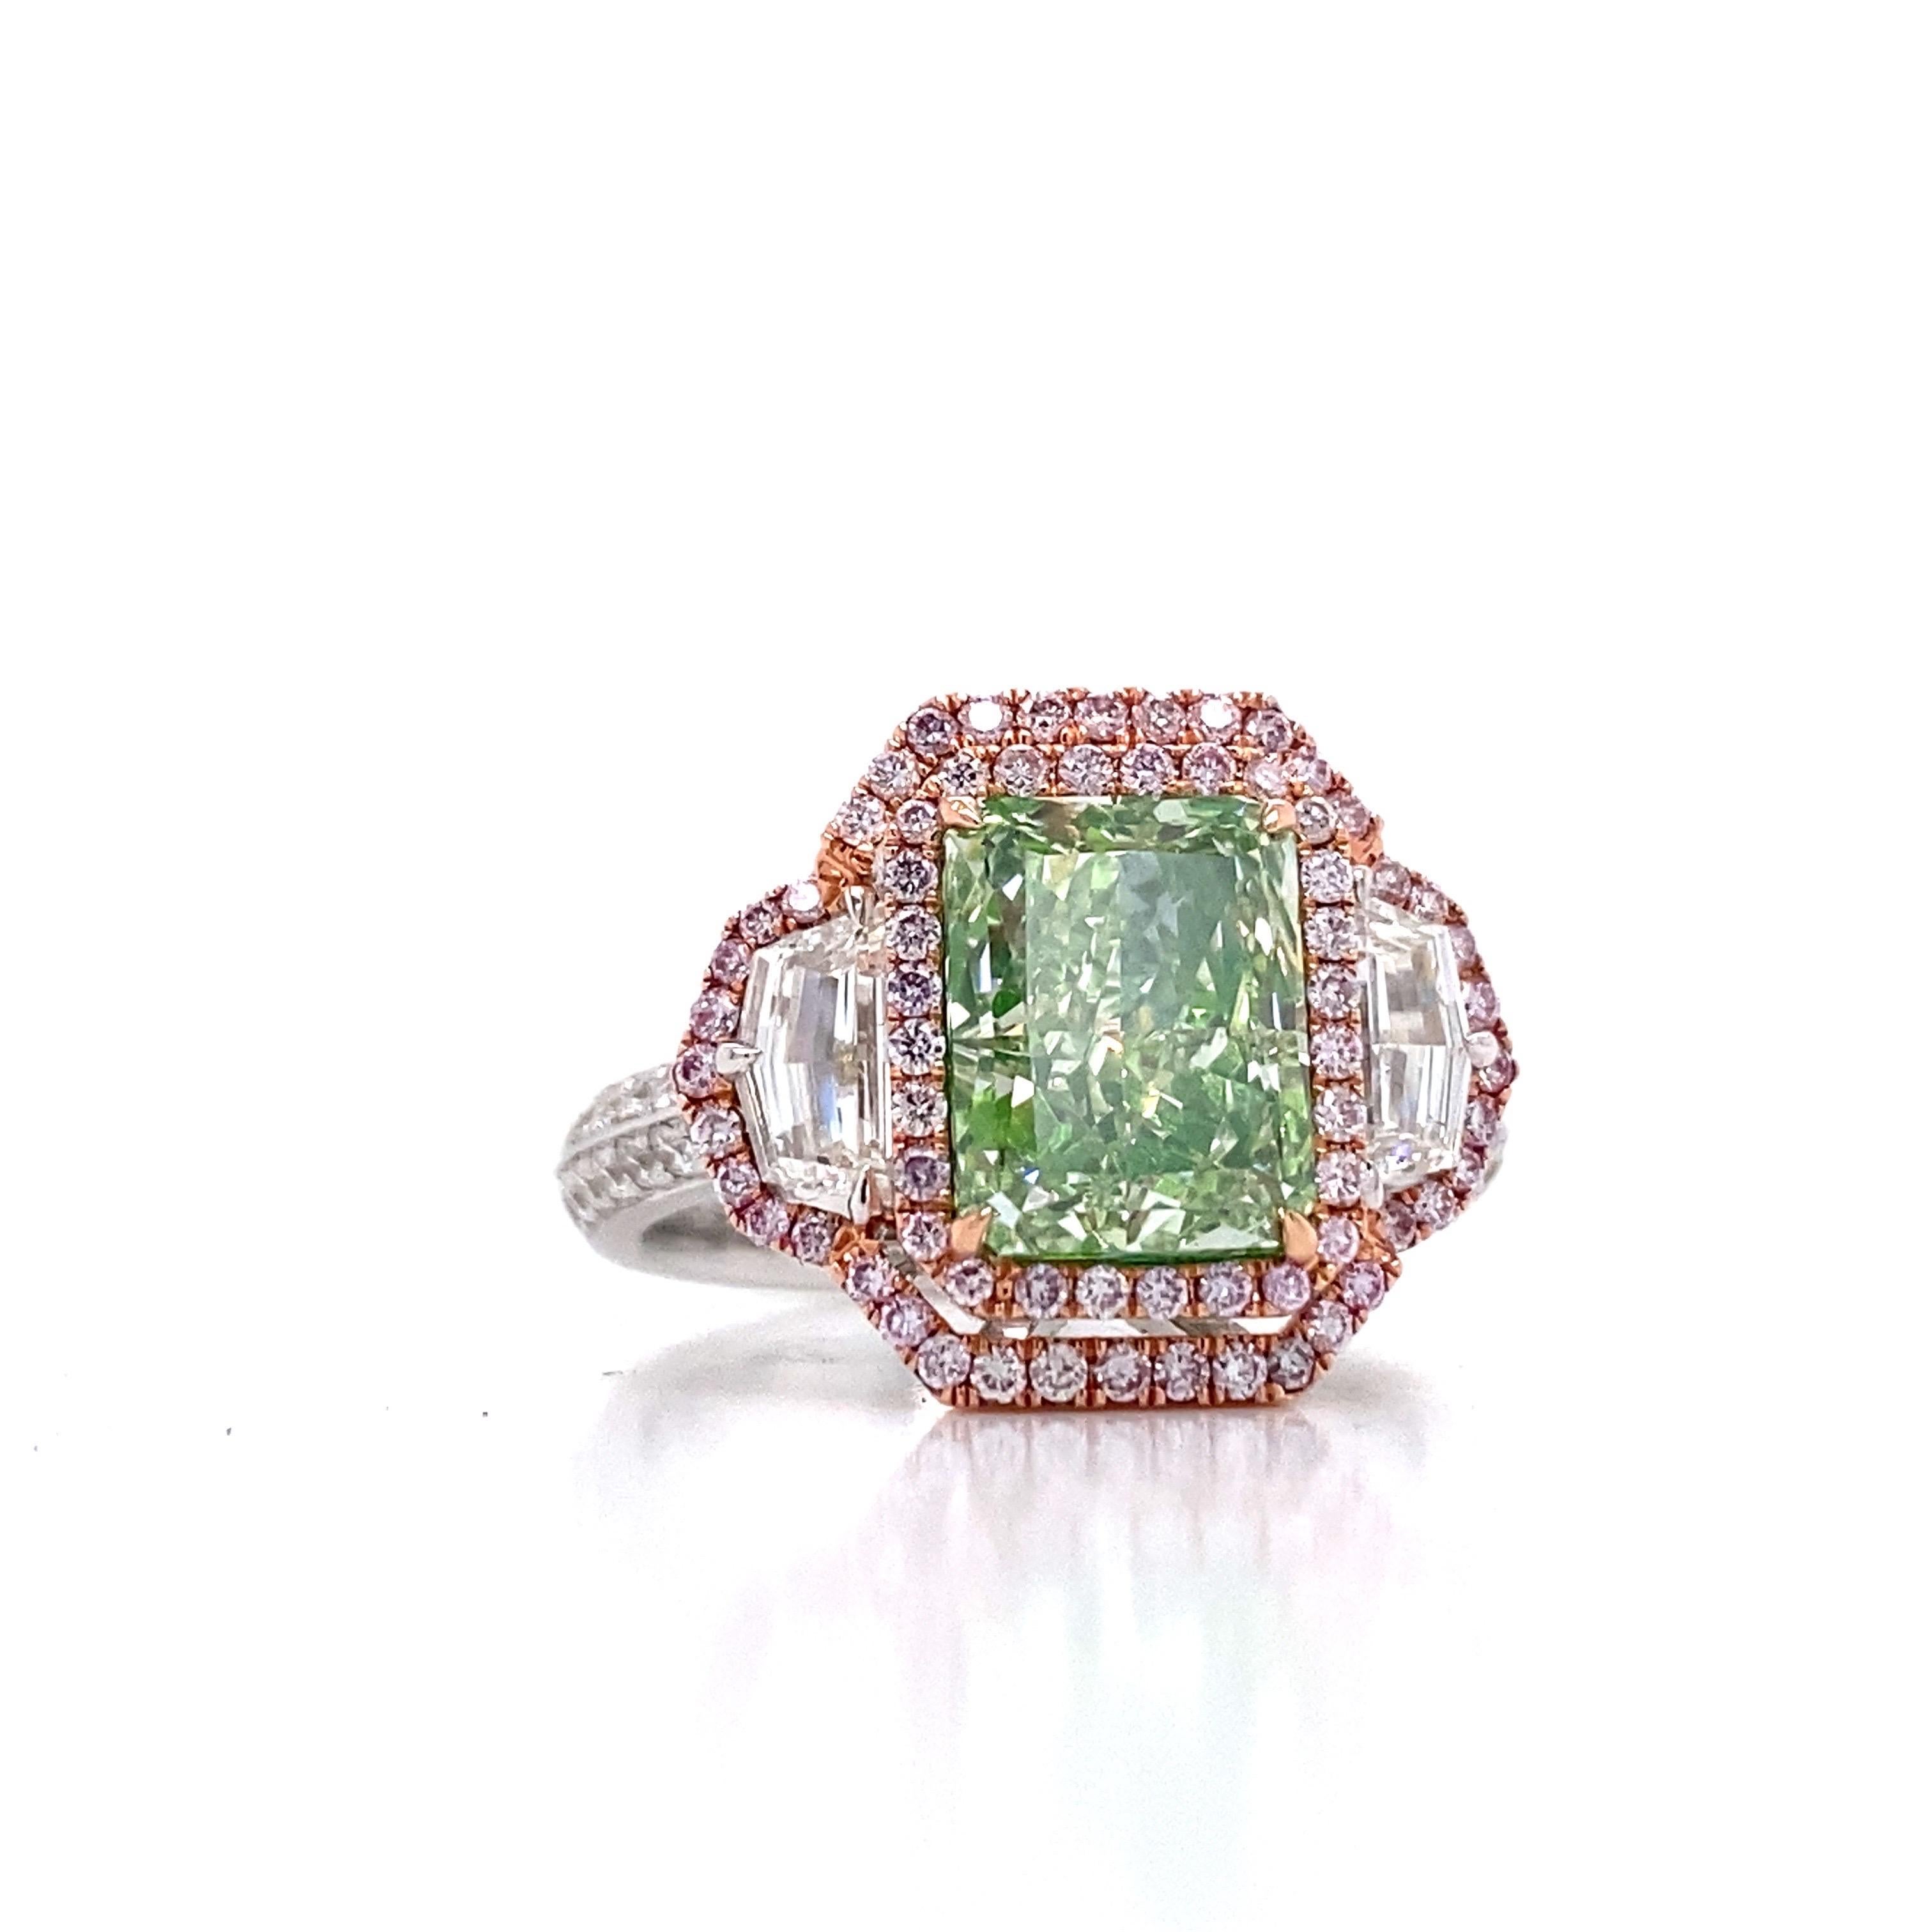 From The Vault at Emilio Jewelry Located on New York's iconic Fifth Avenue,
Showcasing a very special and rare Gia certified natural Greenish Diamond weighing over 3.00 carats. Please inquire for details. 
We specialize in creating special mountings